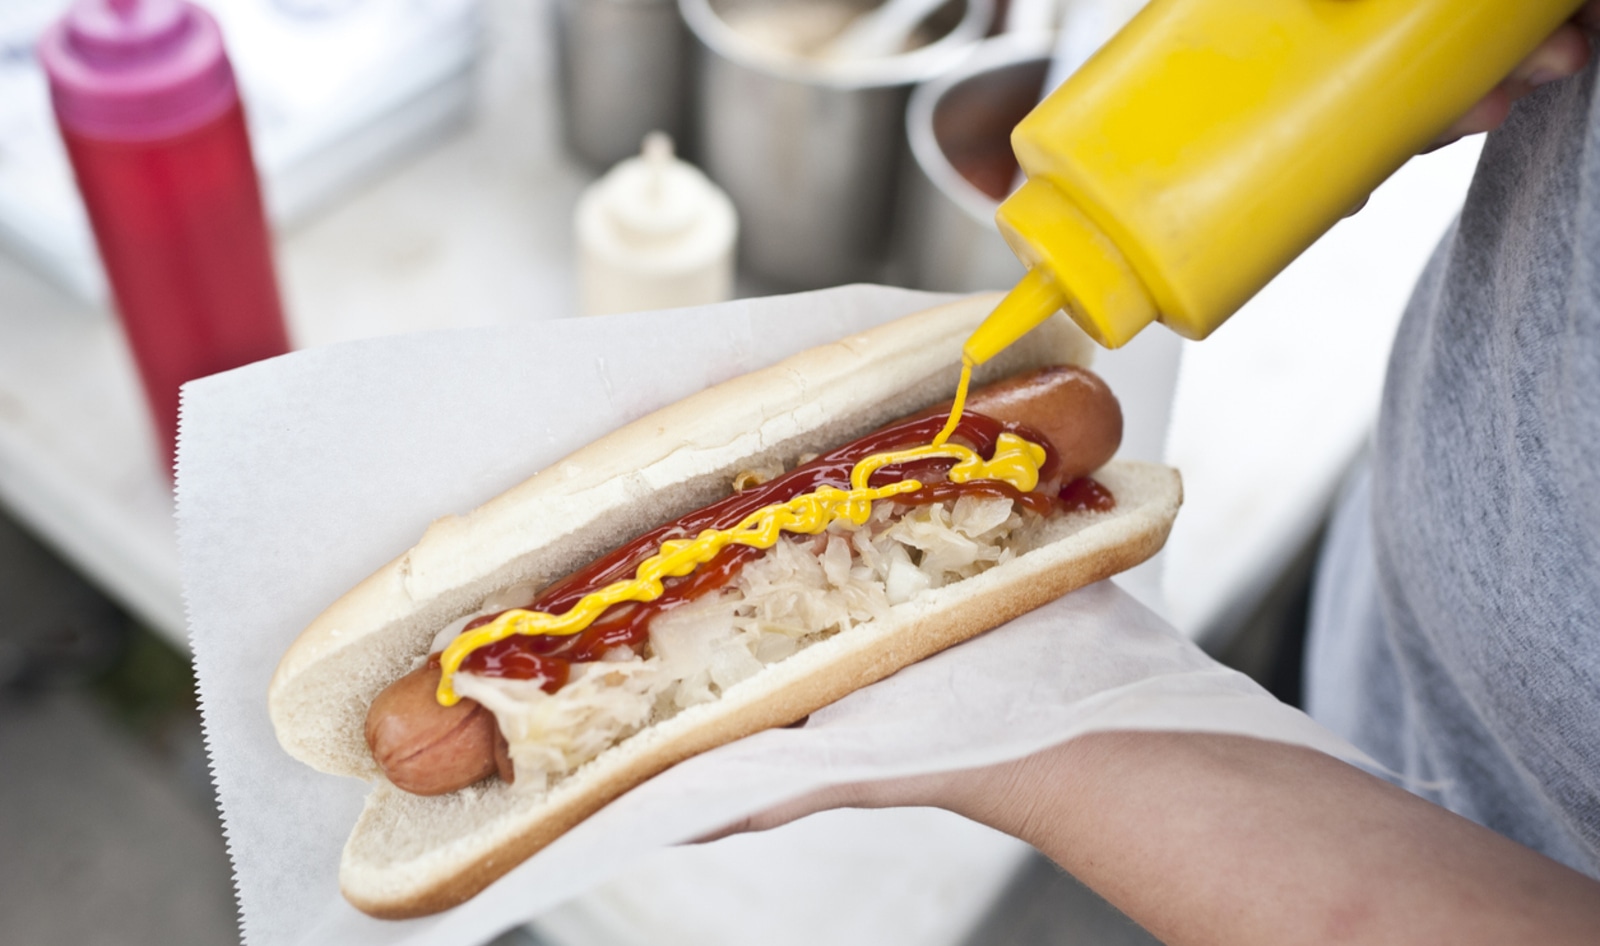 Long-Term Study Links Ultra-processed Meat, Dairy to Higher Mortality Risk